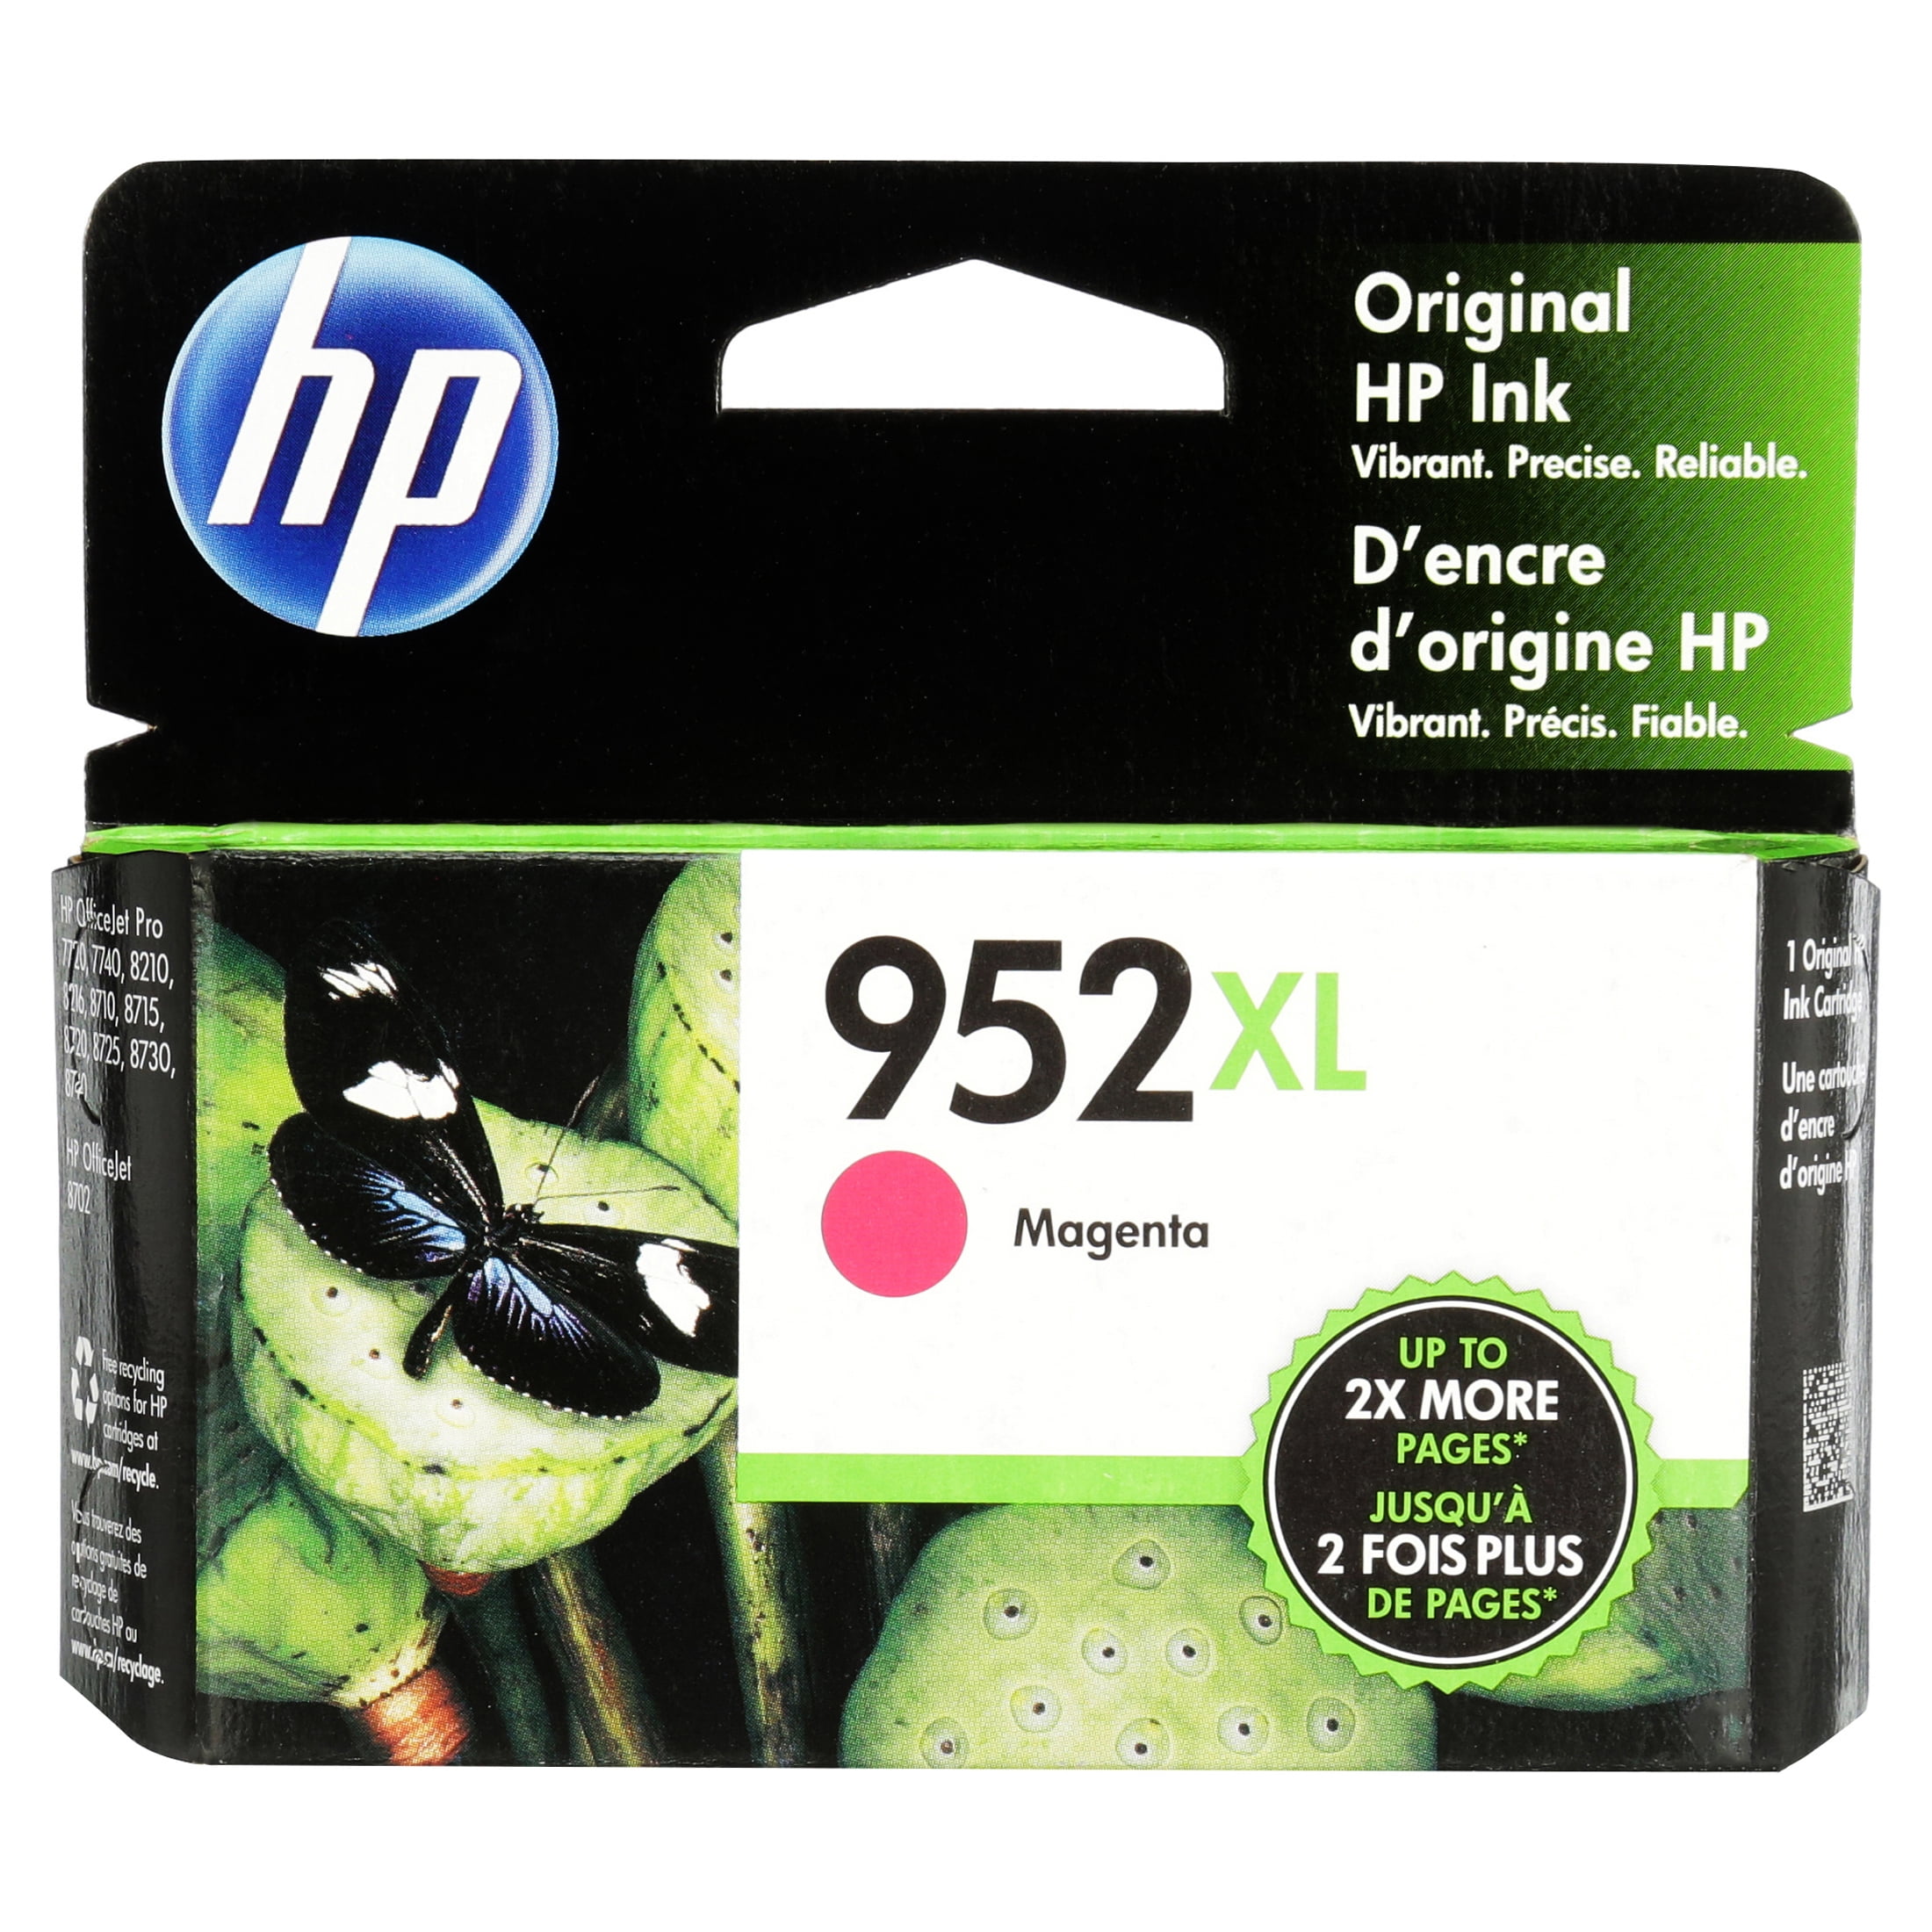 LD Compatible Replacement for HP 952 / 952XL / L0S64AN HY Magenta Ink  Cartridge for OfficeJet 7740, 8702, 8715 & OfficeJet Pro 7740, 8210, 8216,  8717, 8718, 8726, 8736, 8740, 8743, 8744, 8745 